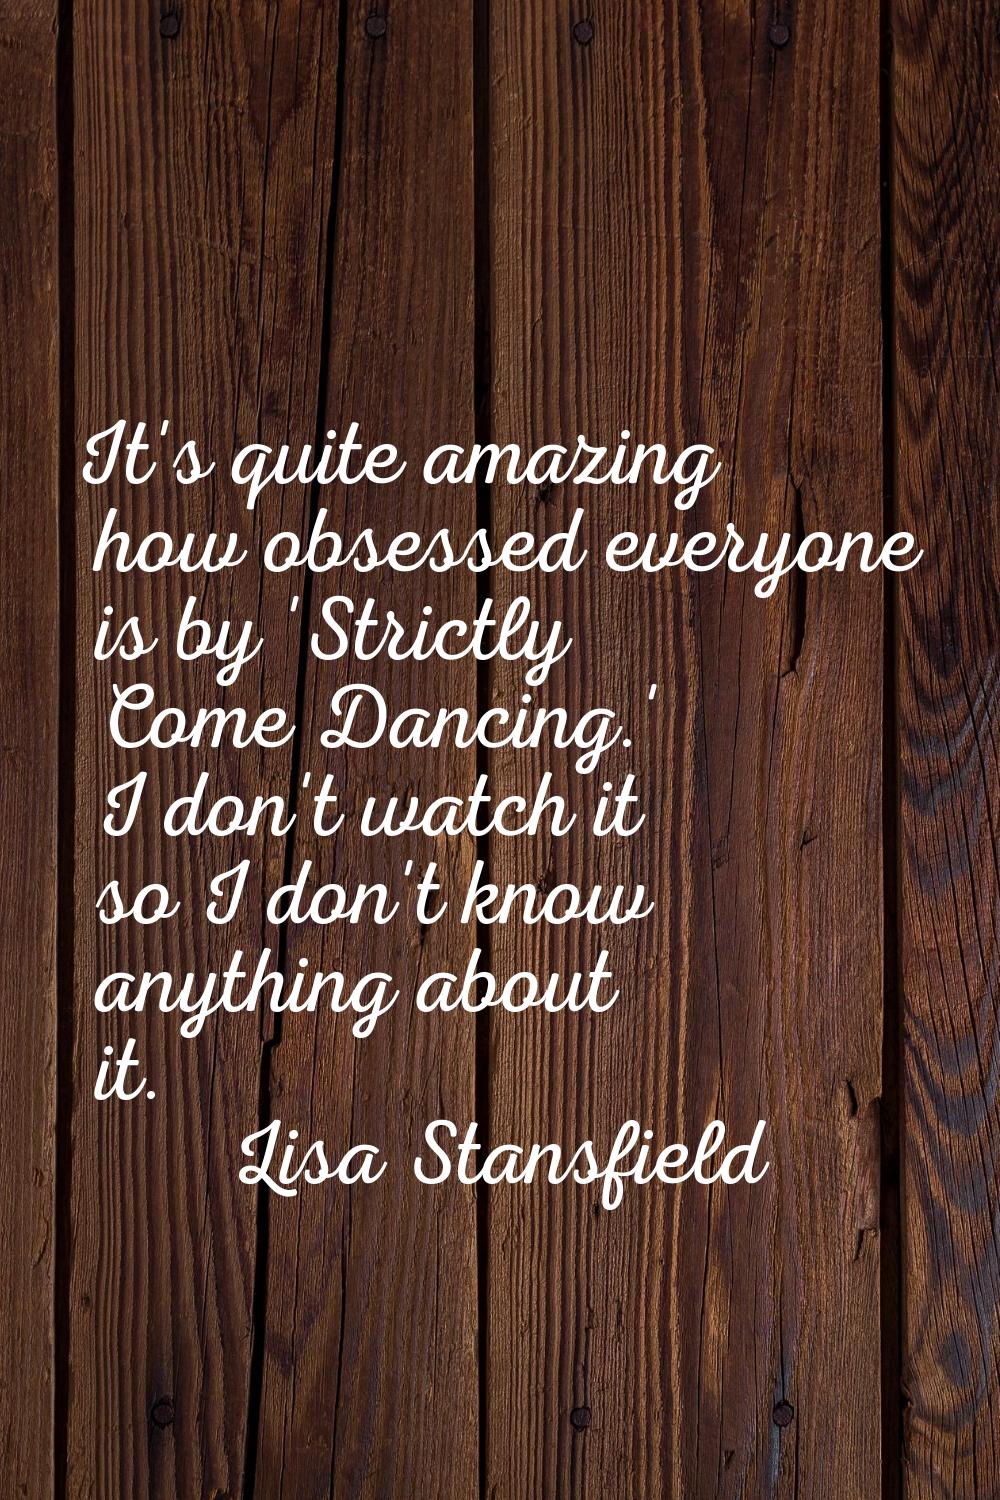 It's quite amazing how obsessed everyone is by 'Strictly Come Dancing.' I don't watch it so I don't